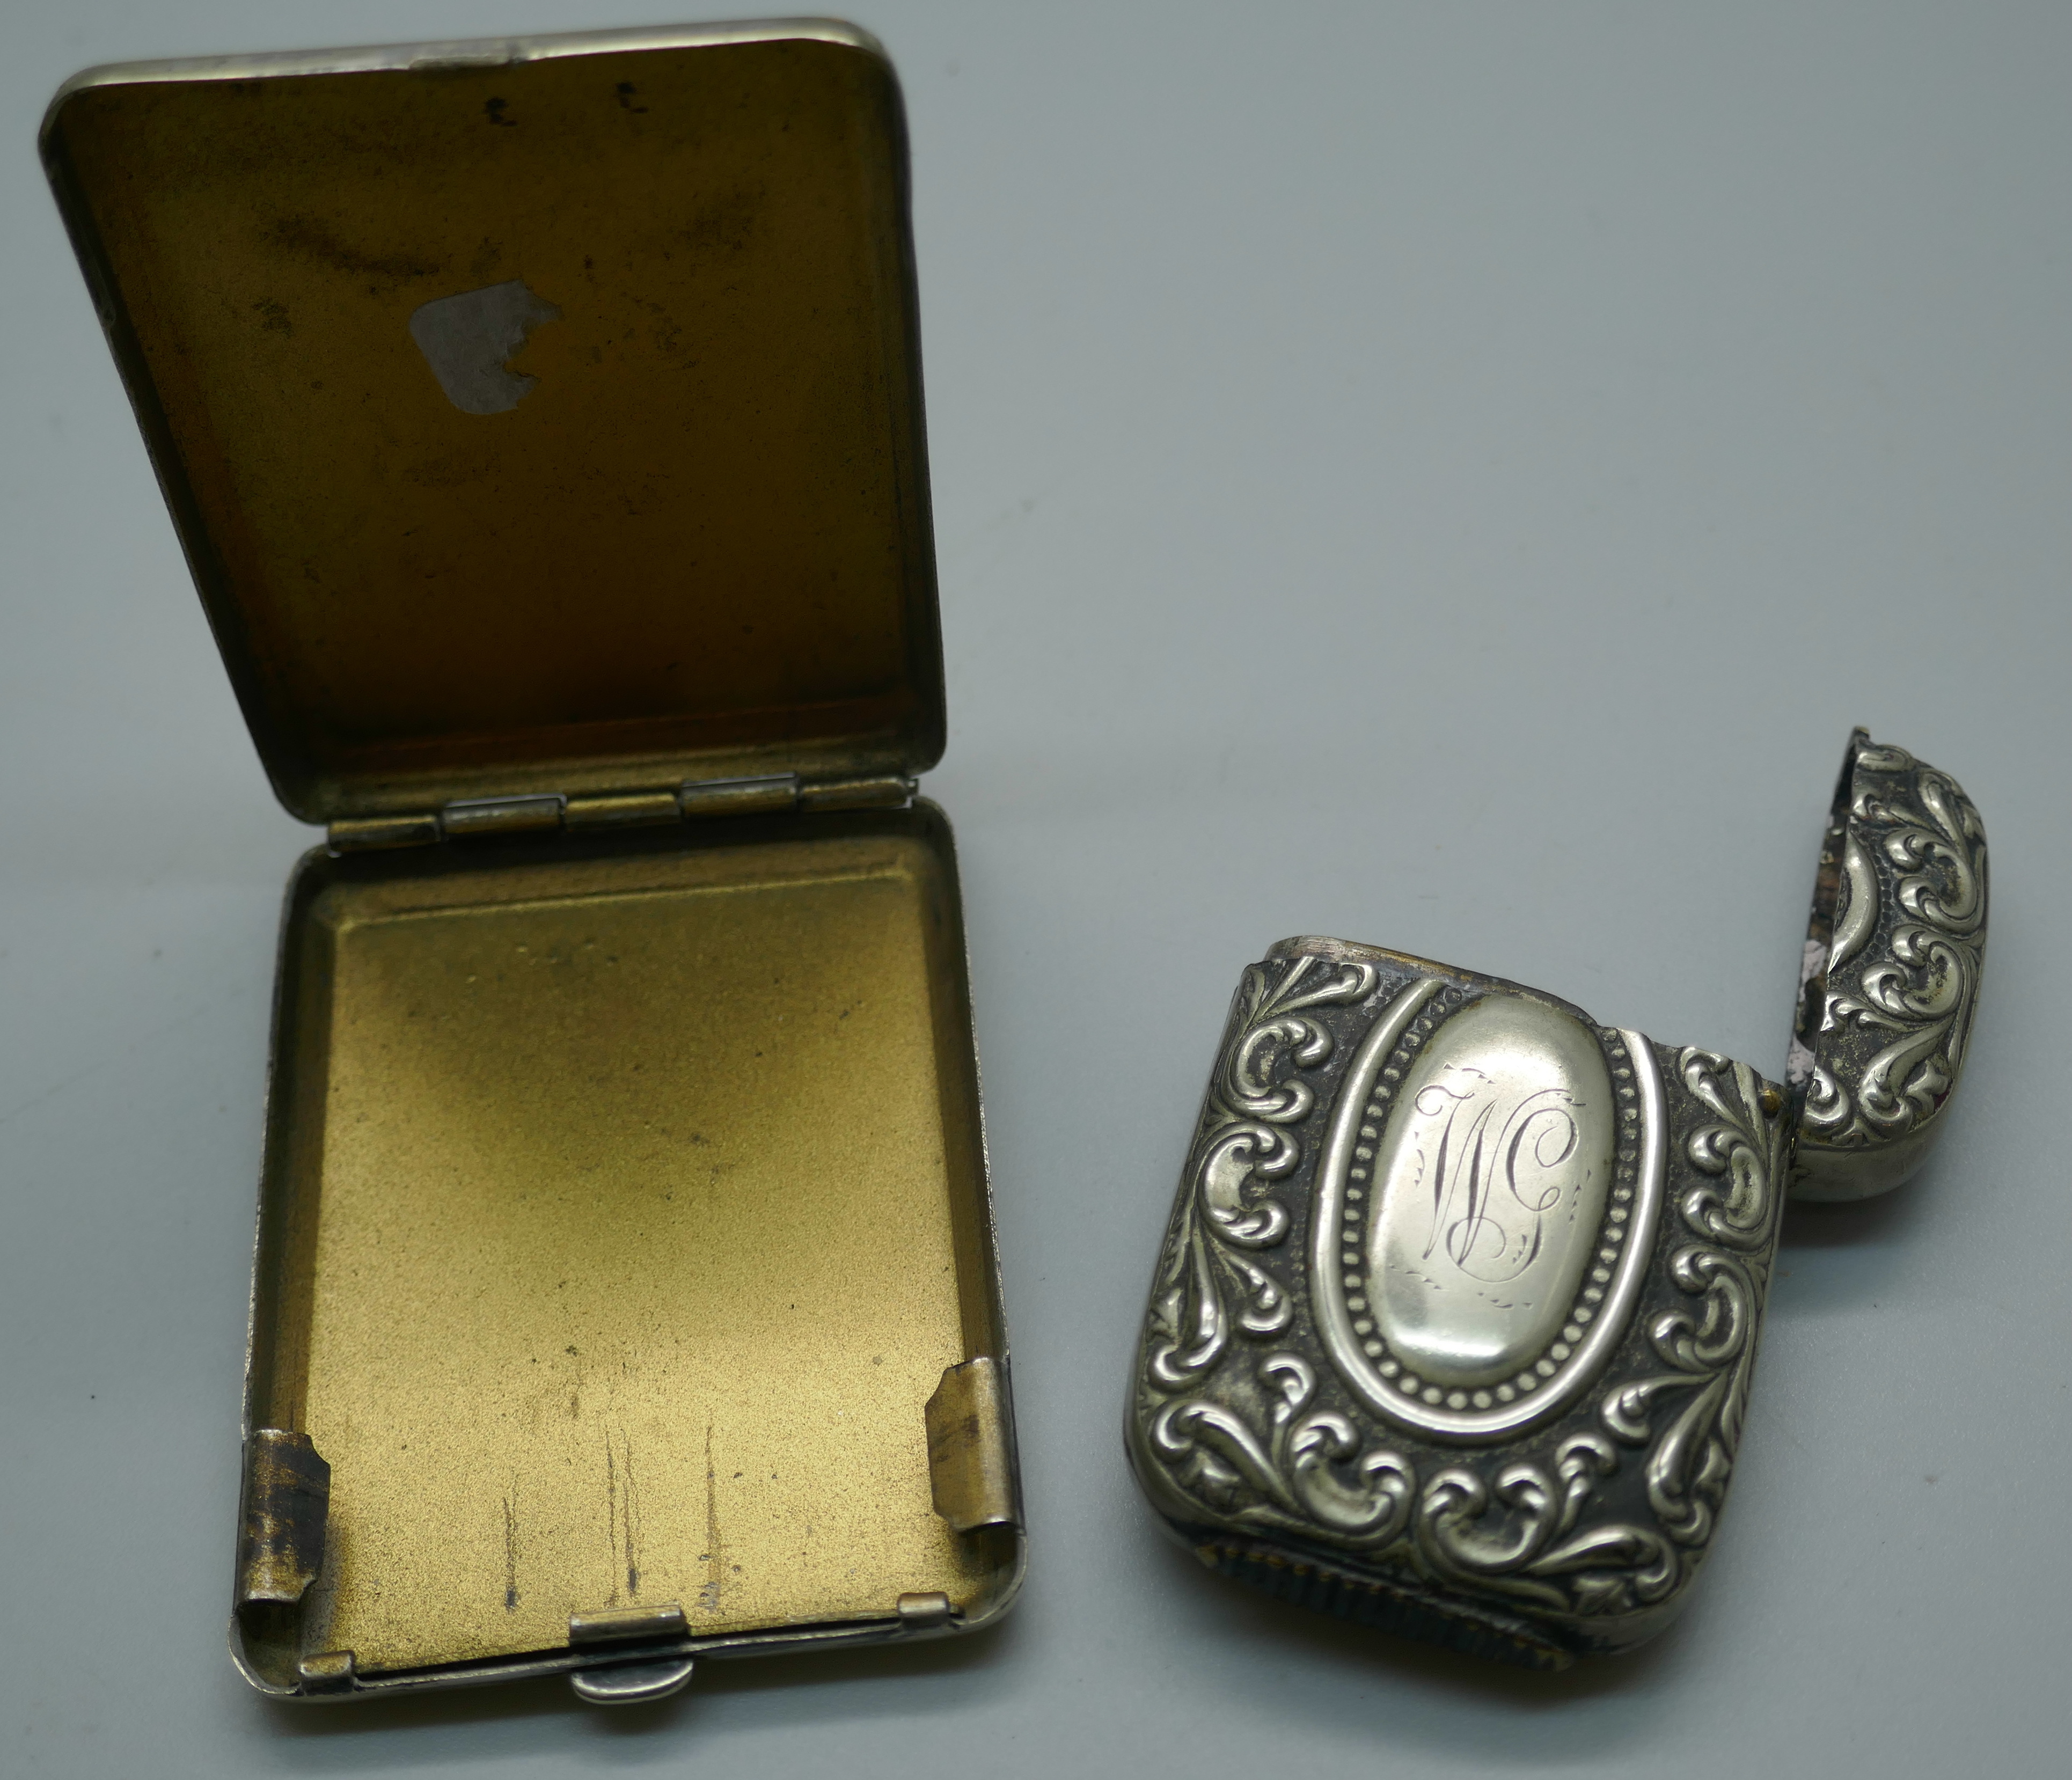 A powder case, a claret decanter label, an inkwell, a lighter, three bracelets with charms, a - Bild 5 aus 5